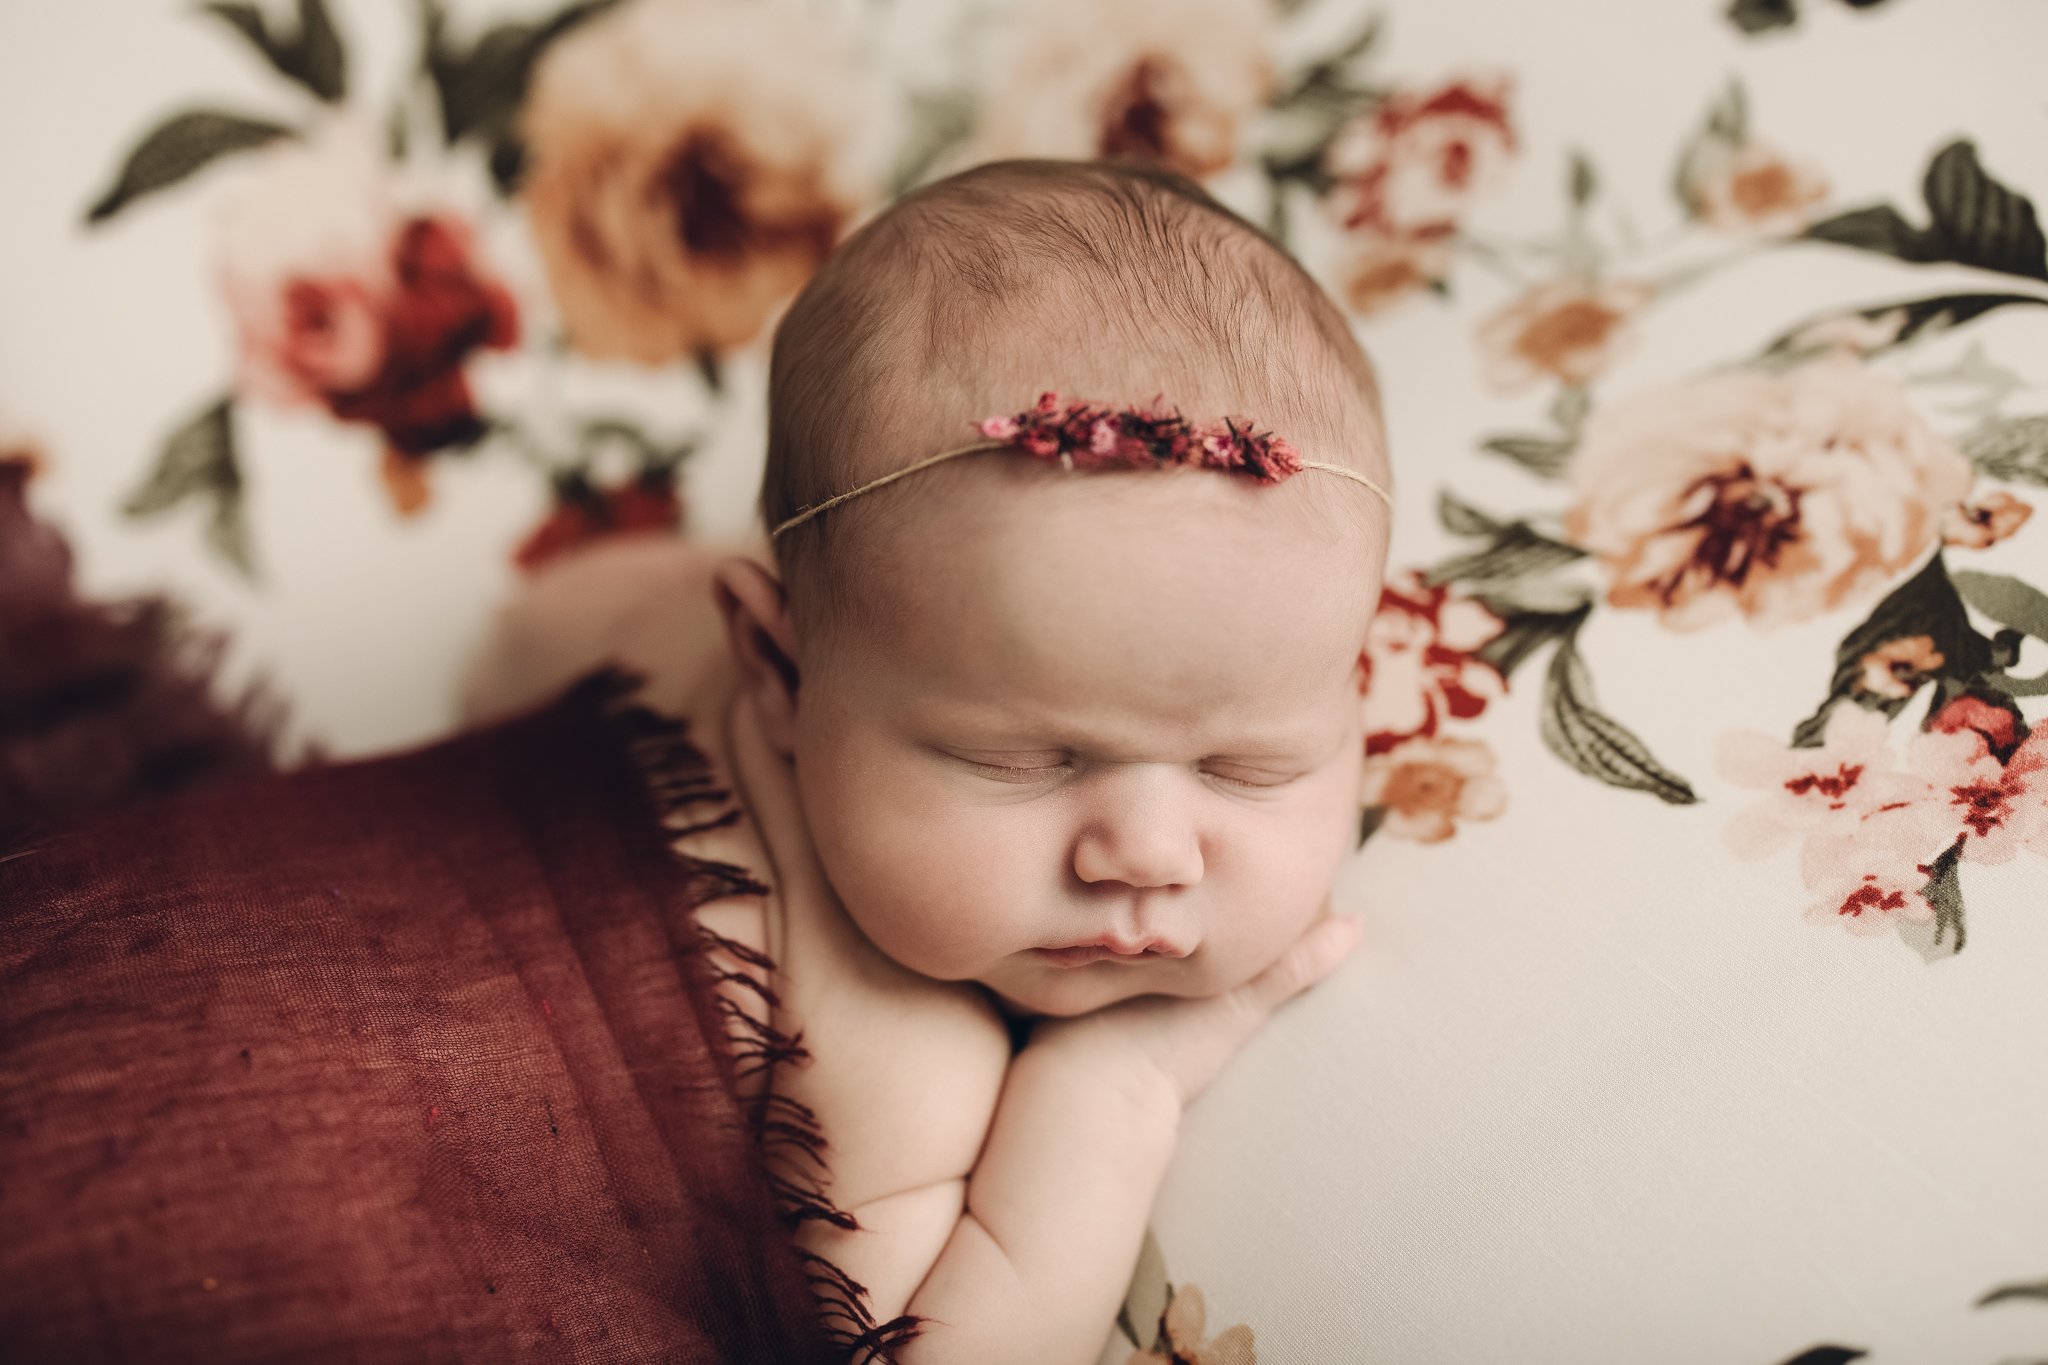 Posed_Studio_Newborn_Photographer_Second_Child_Siblings_Baby_Girl_Pink_Floral_by_Christie_Leigh_Photo_Champion_OH_Ohio_Trumbull_County-12.jpg